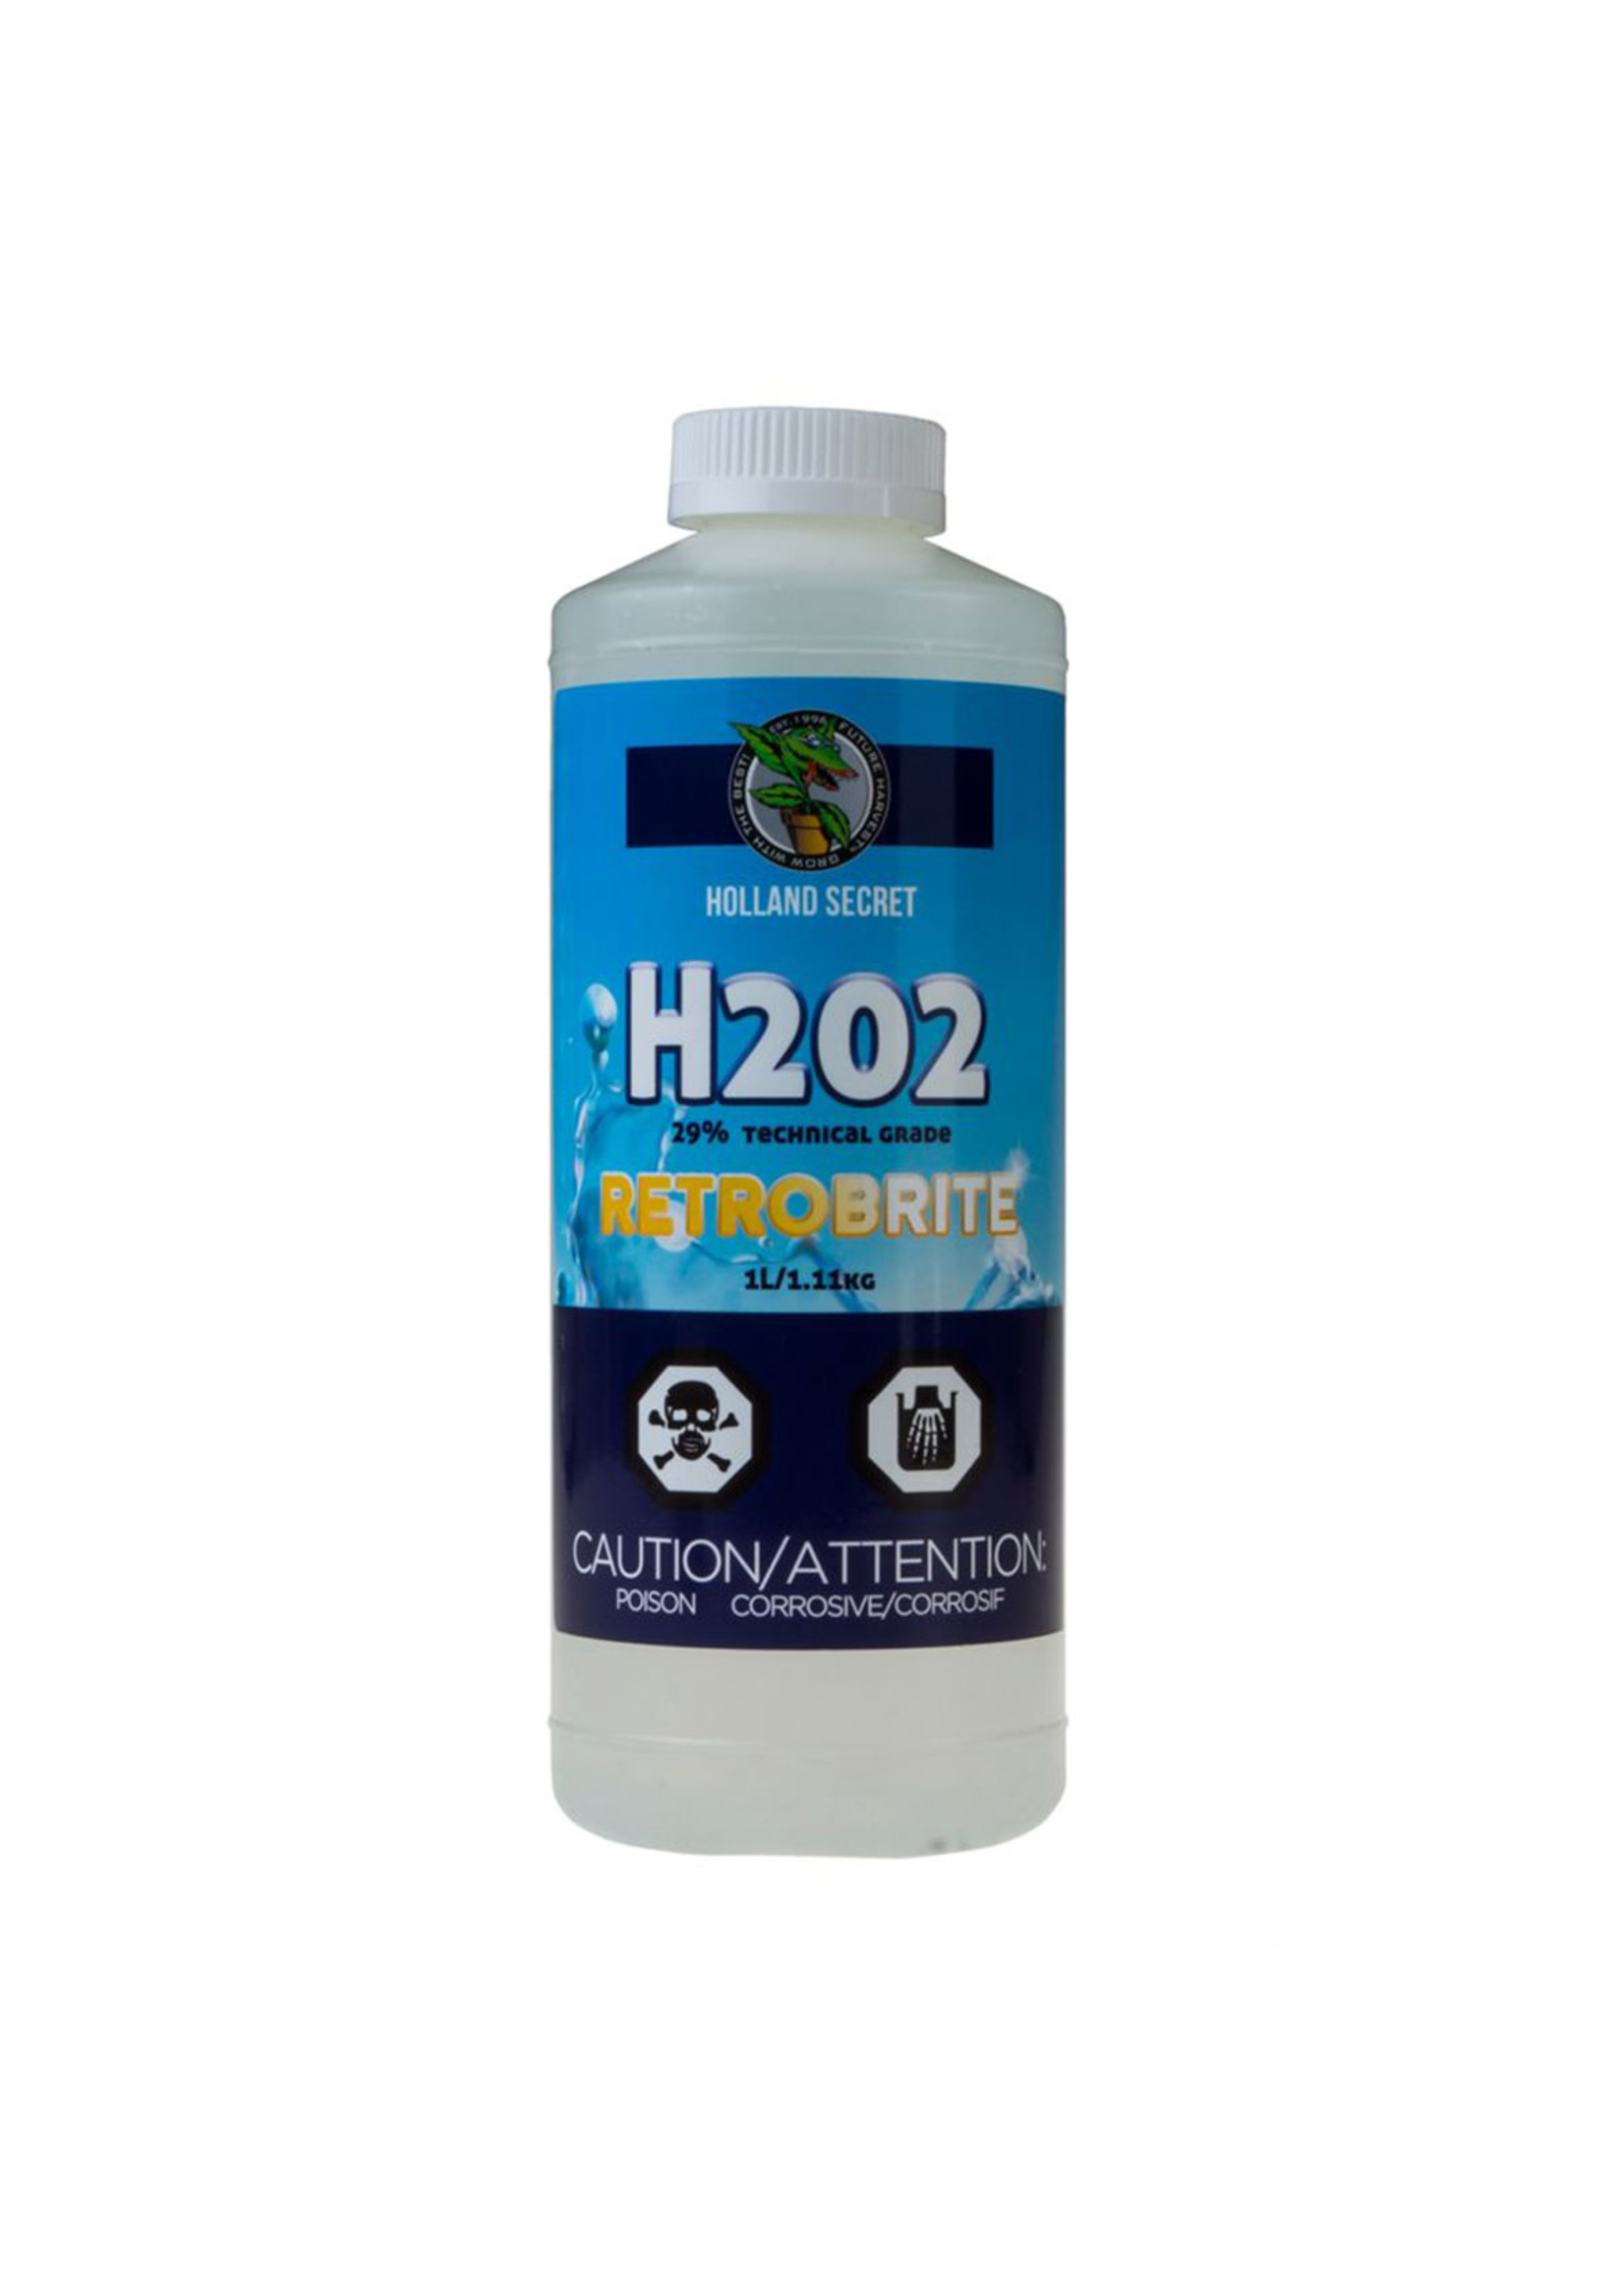 Future Harvest HYDROGEN PEROXIDE  H2O2 29% – RETROBRITE. IN-STORE ONLY!!